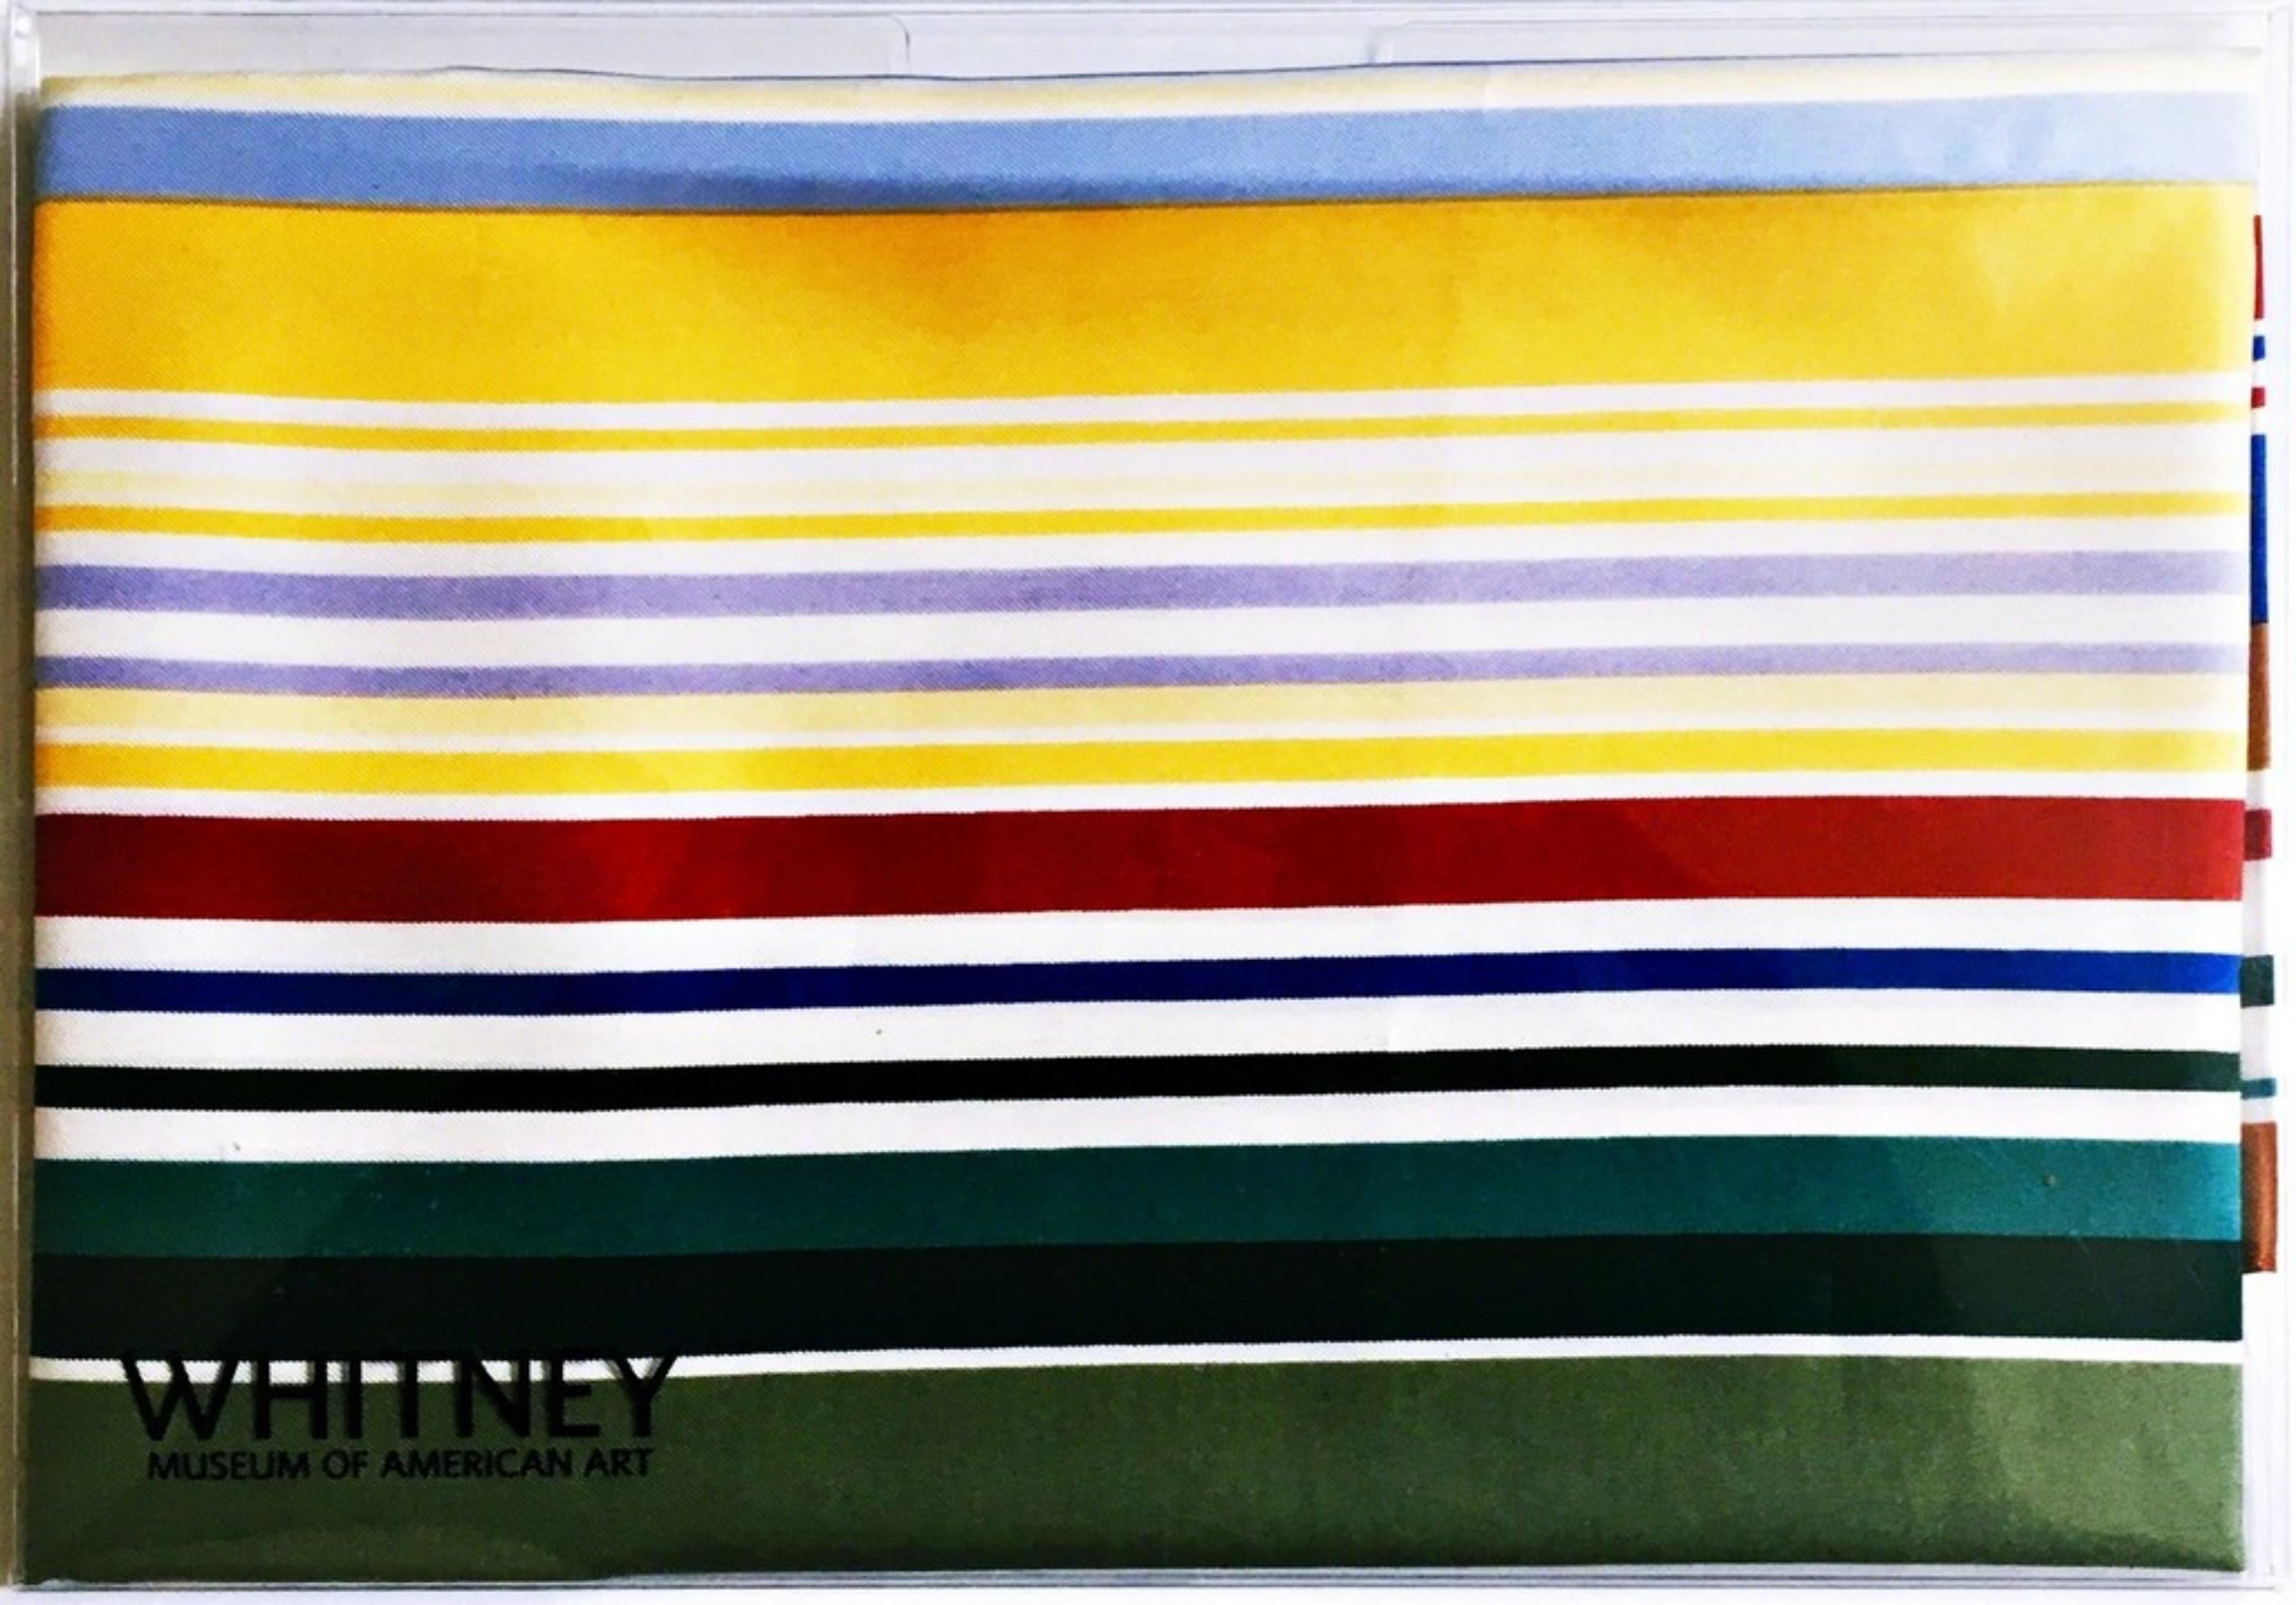 Untitled Whitney Museum Scarf Color Field Geometric Abstraction Limited Edition - Print by Kenneth Noland